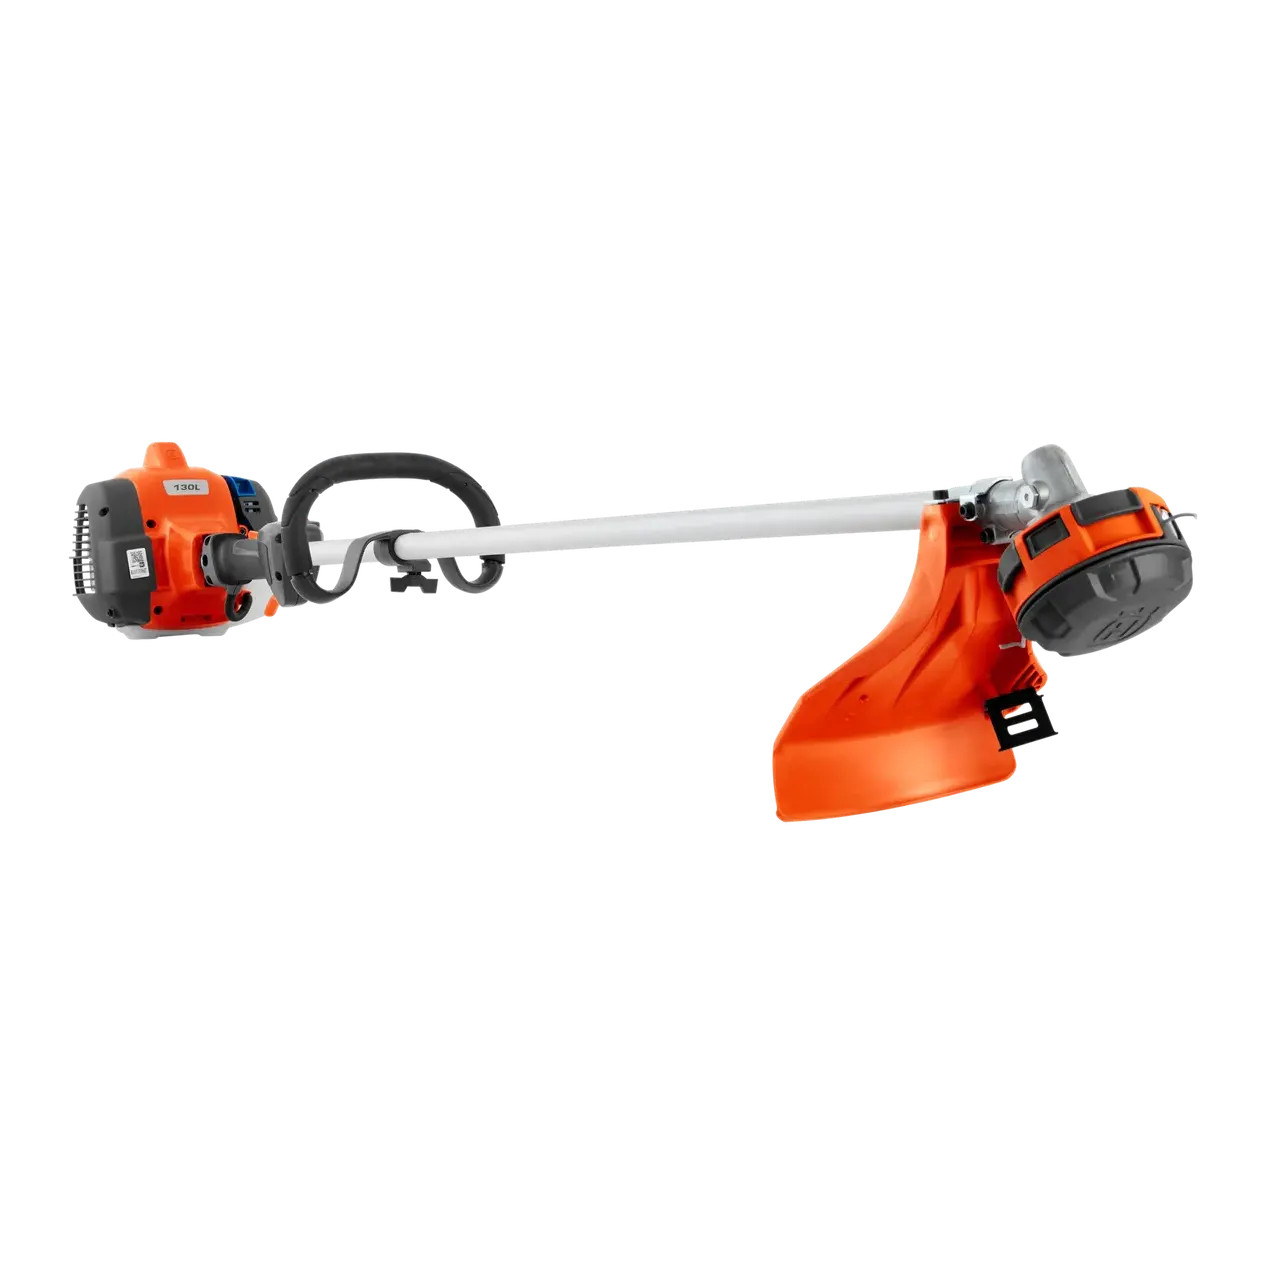 Husqvarna 130L 28cc Straight Shaft Gas String Trimmer with Rapid Replace Trimmer Head - - EZEE.com: High-end made ezee!